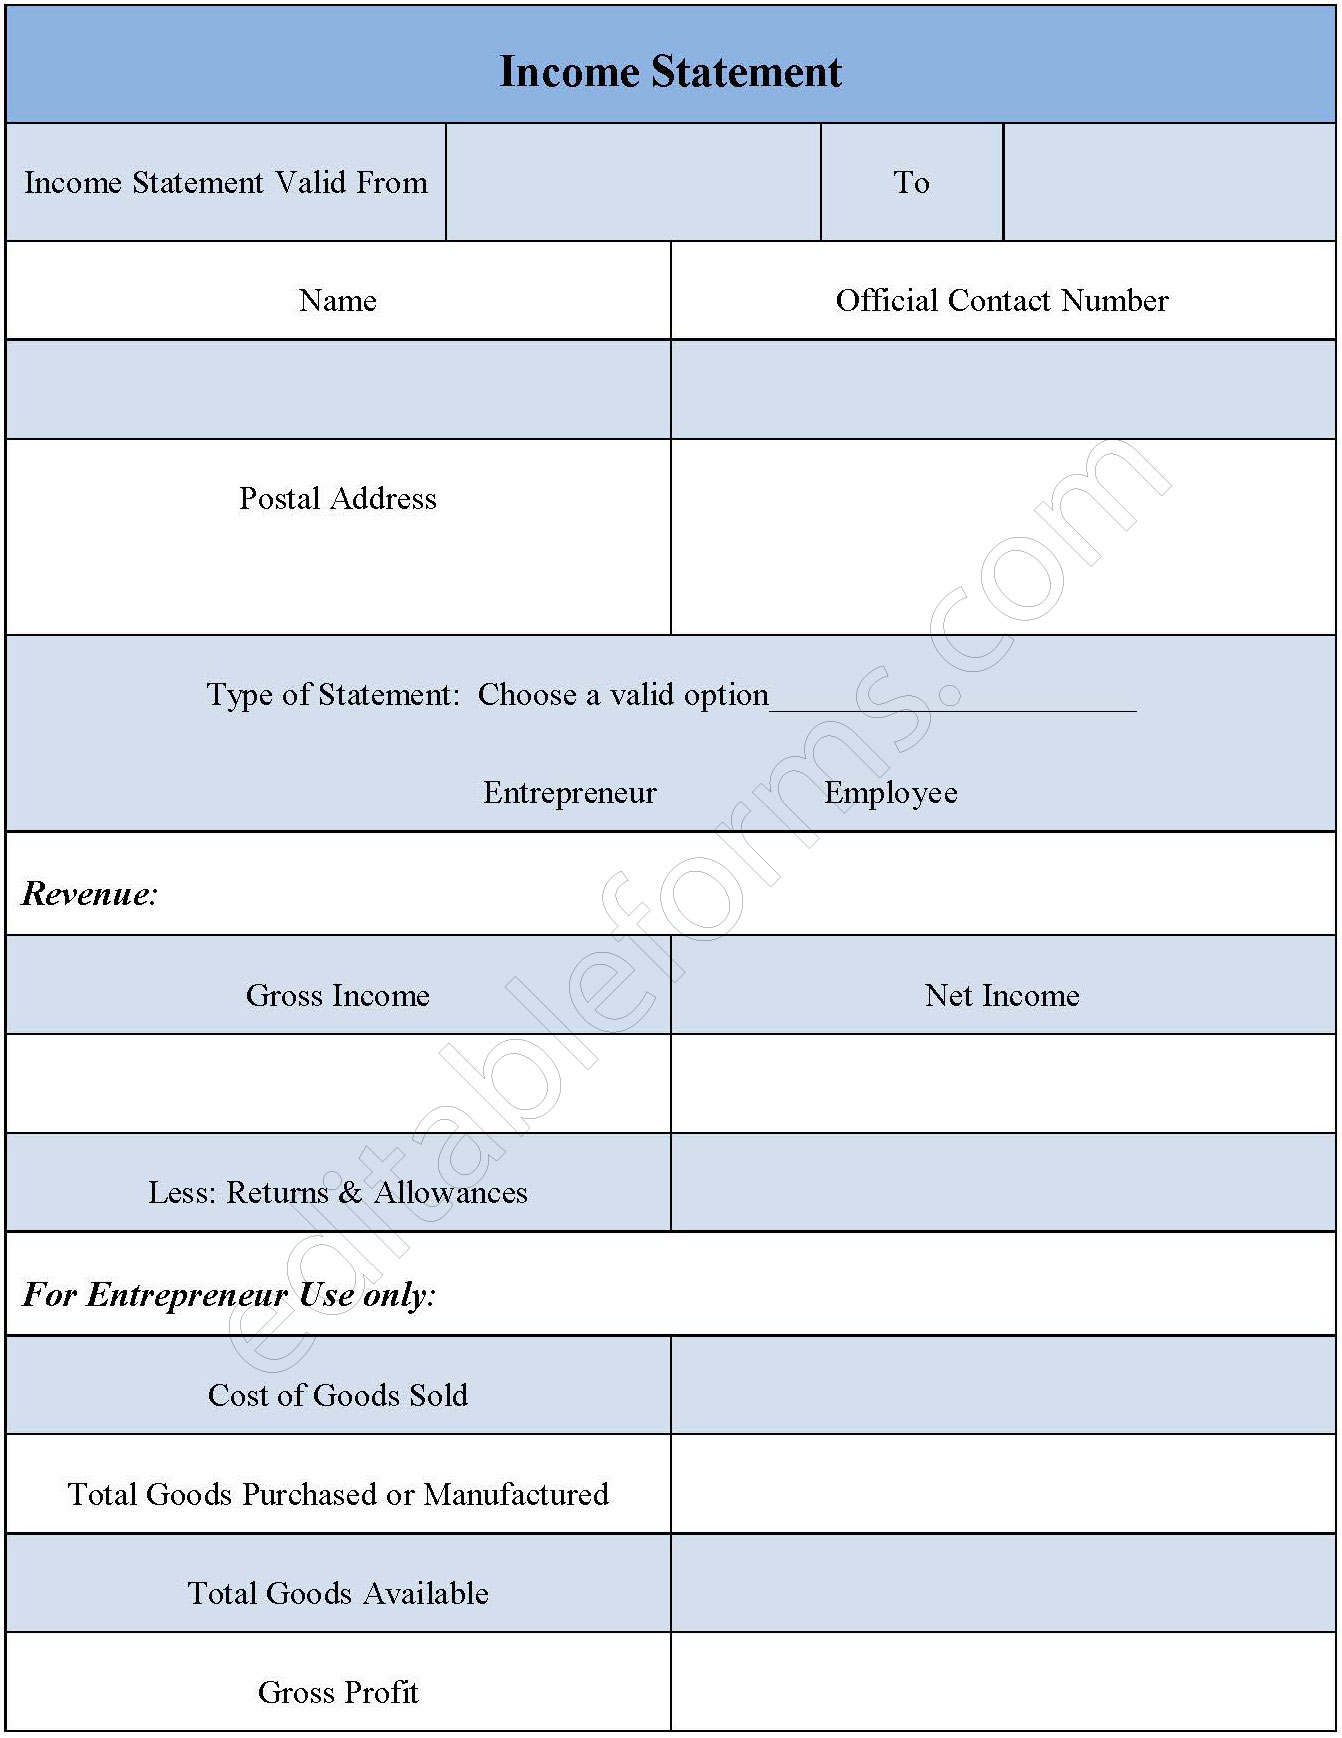 Income Statement Form